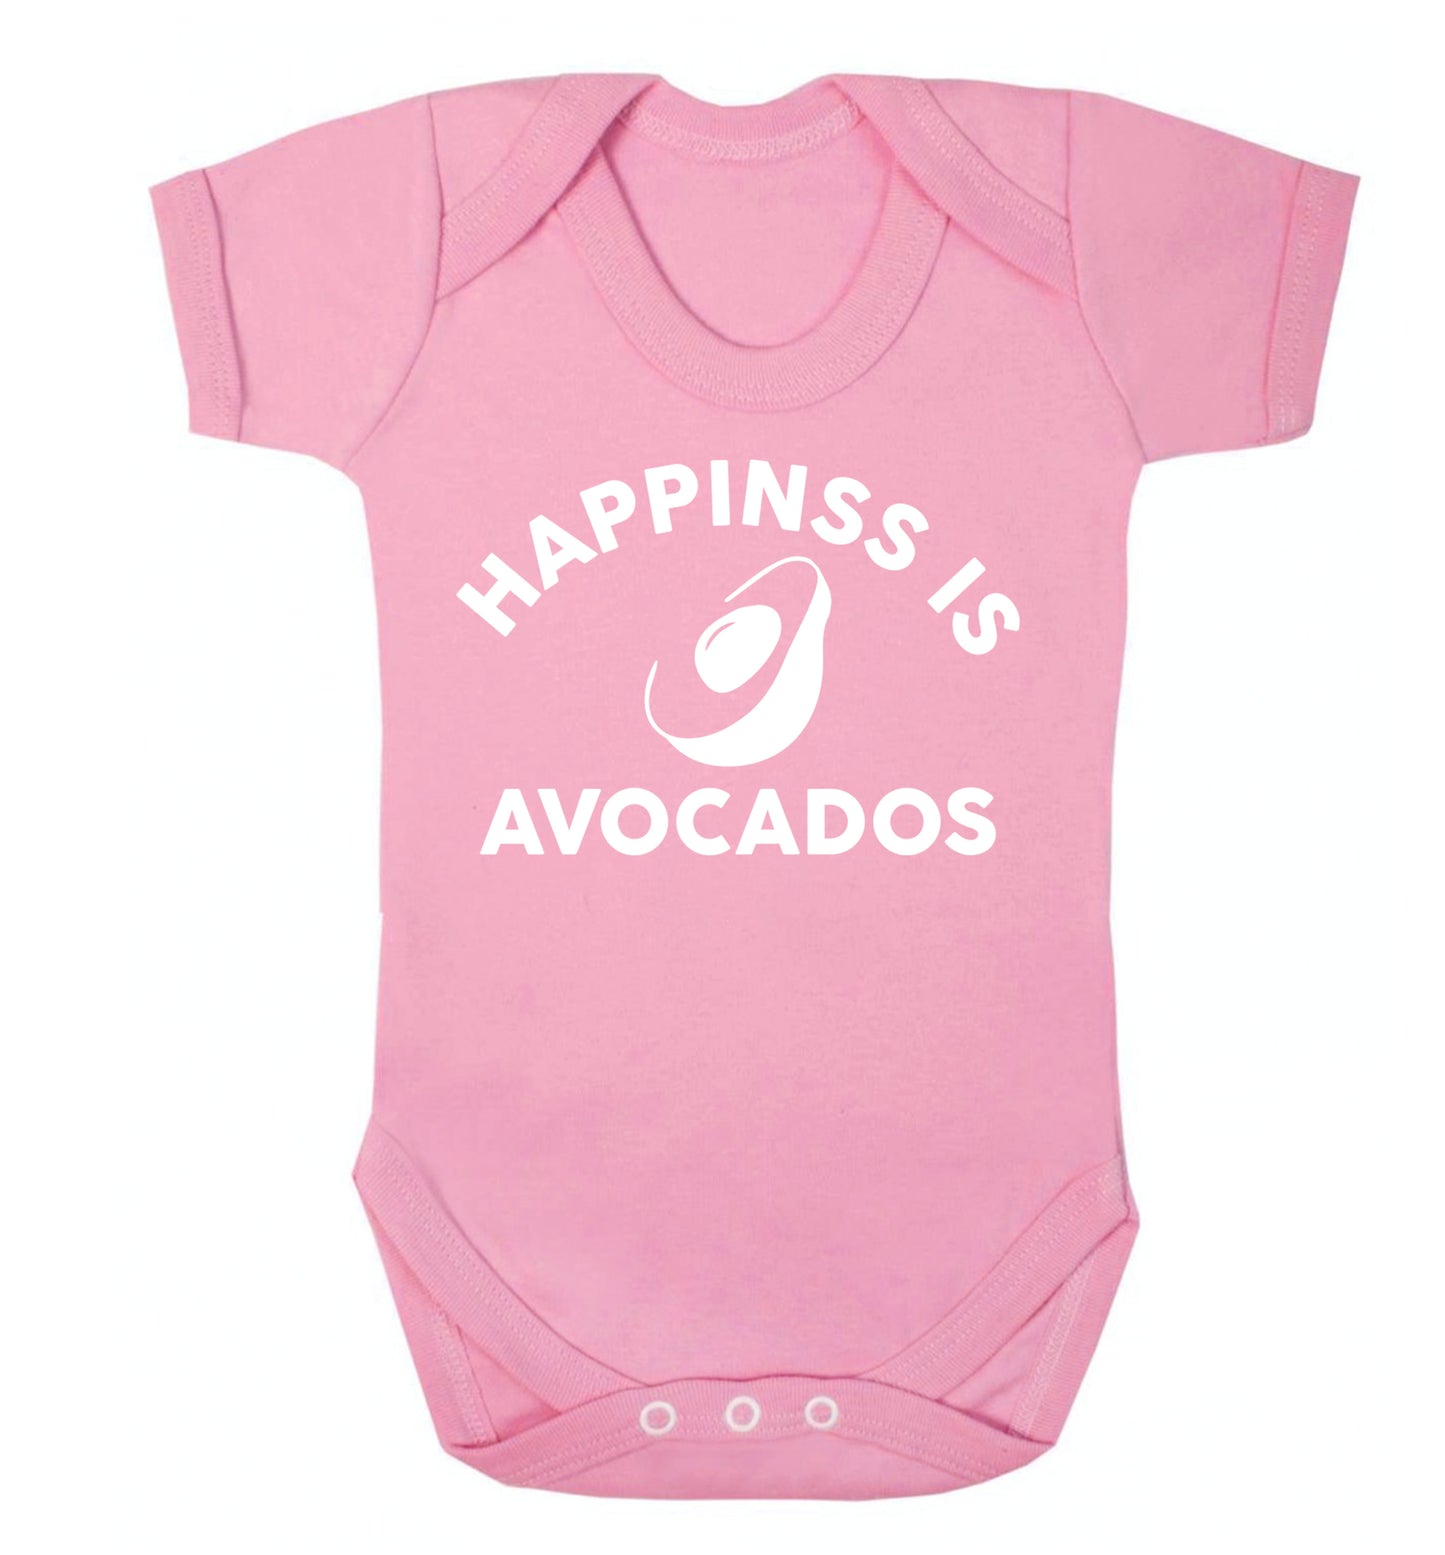 Happiness is avocados Baby Vest pale pink 18-24 months